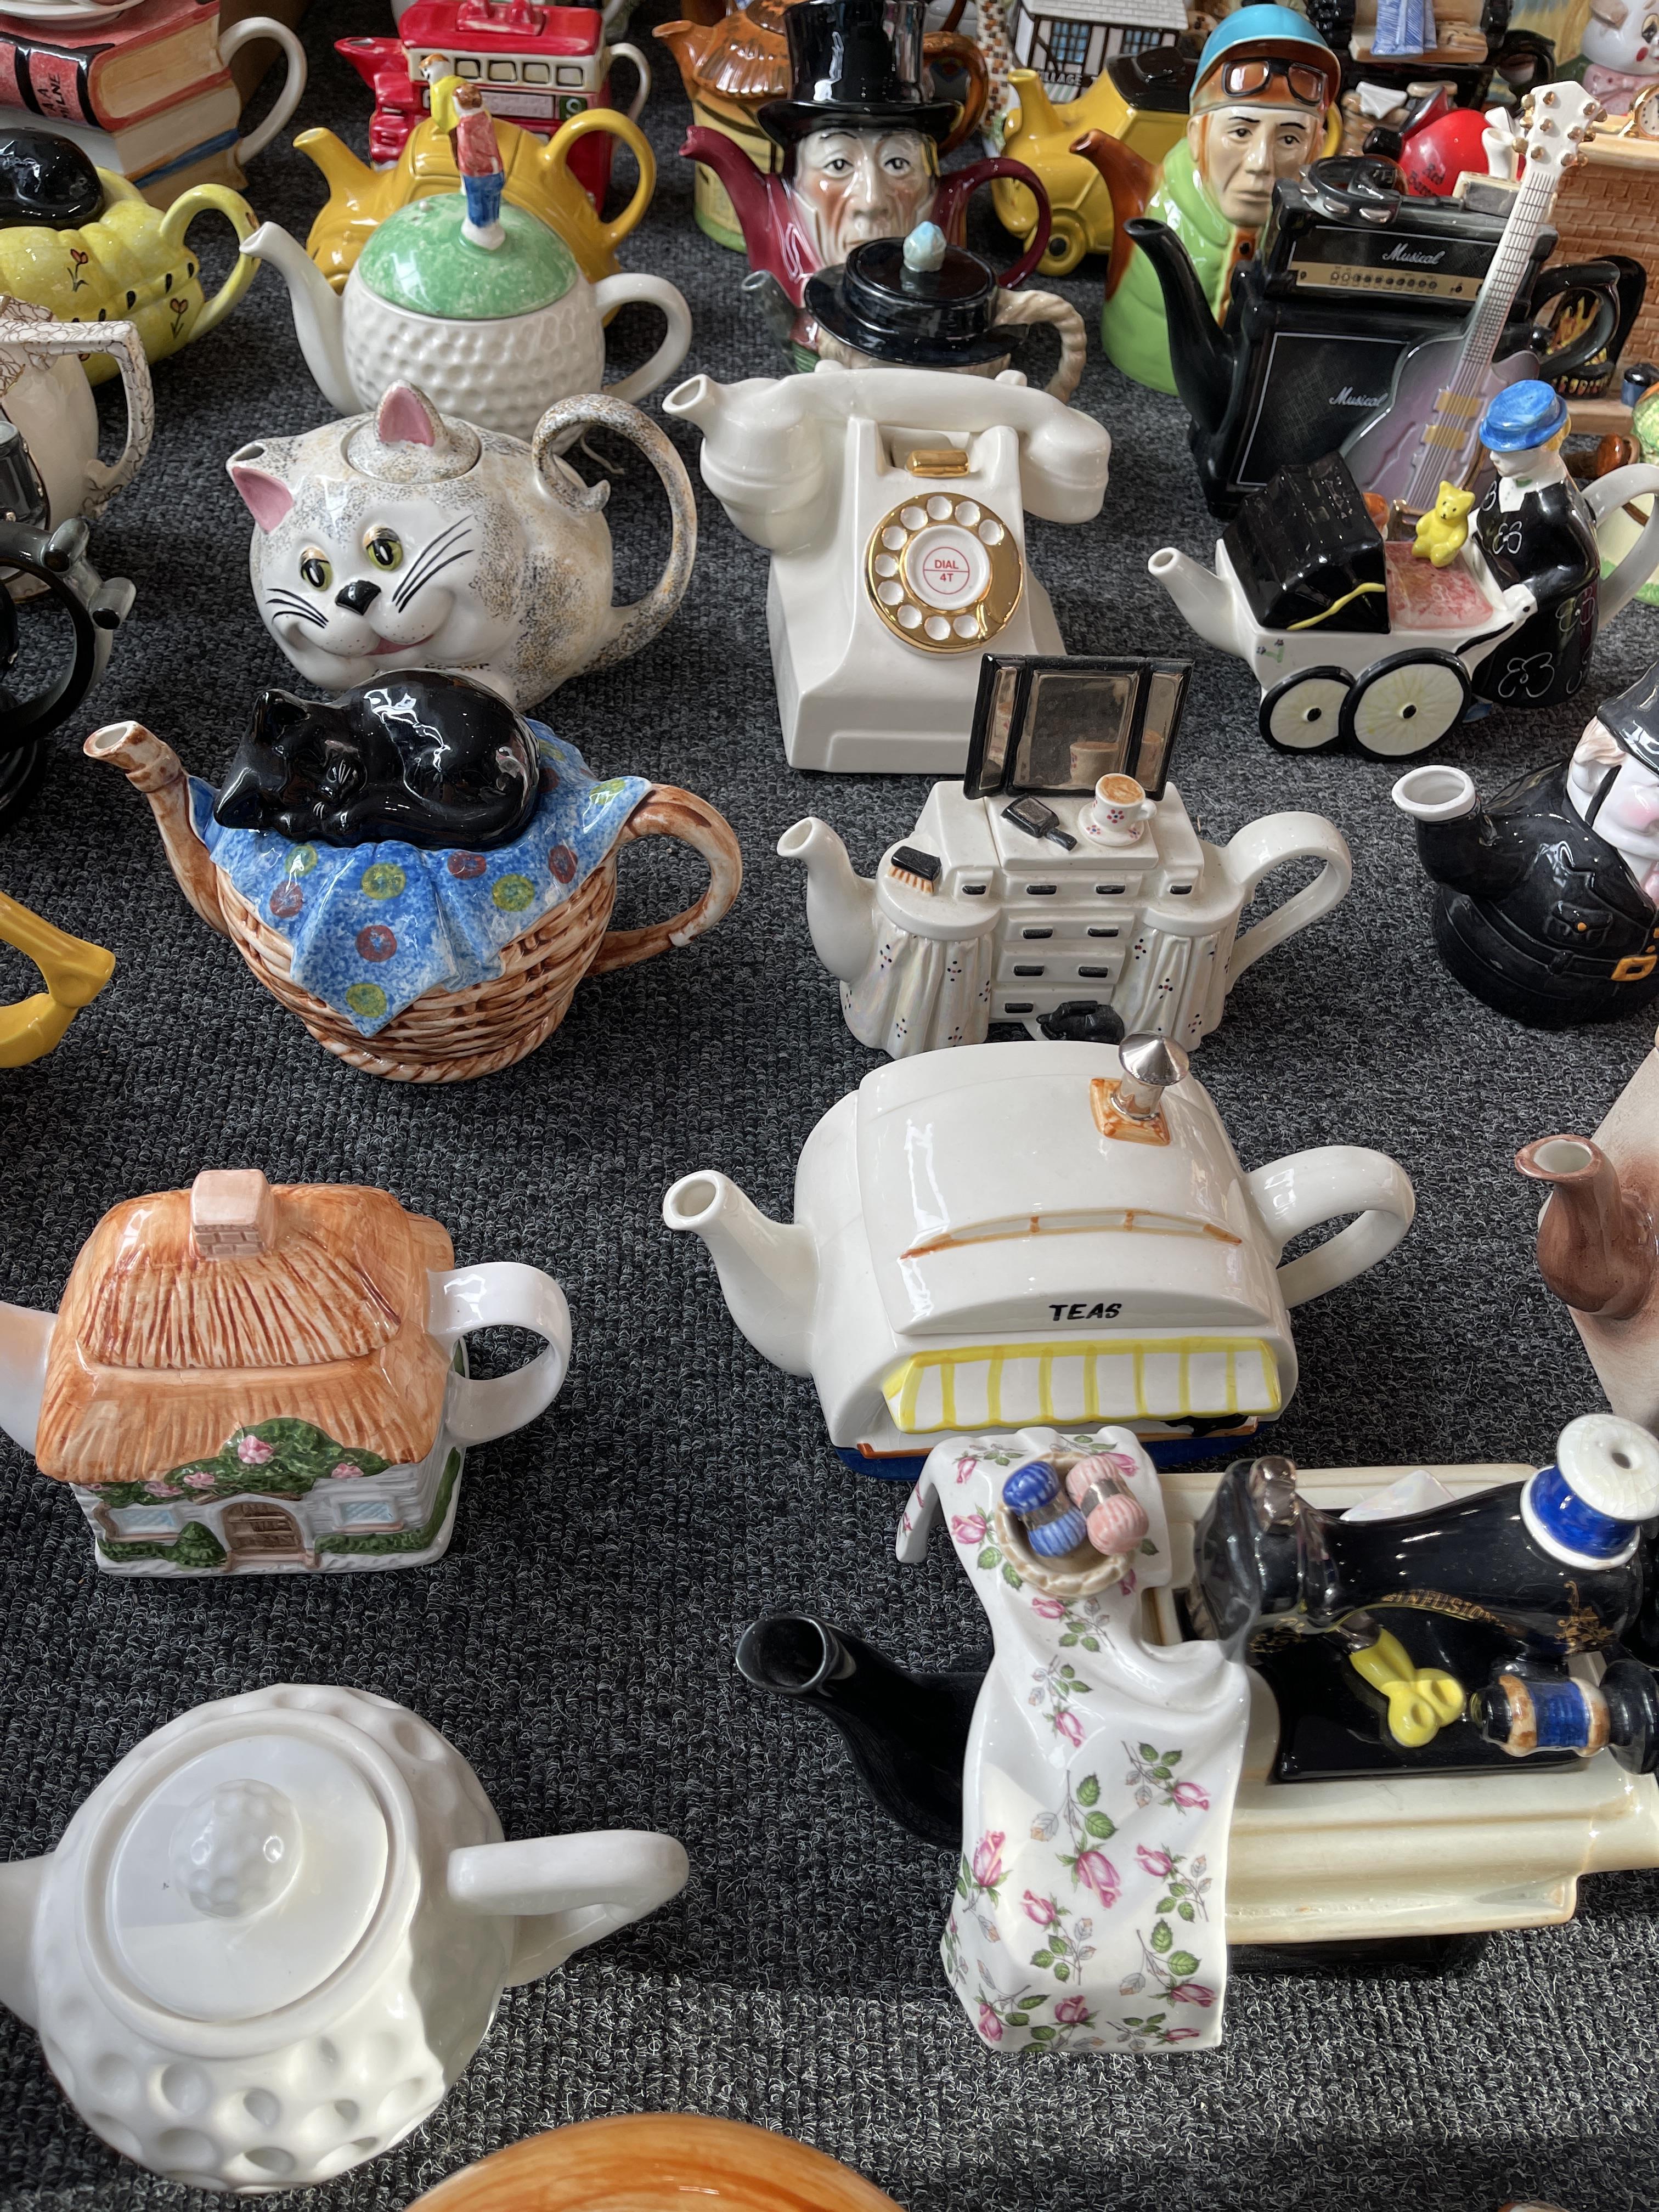 Collection of Ceramic Tea Pots - Image 24 of 44